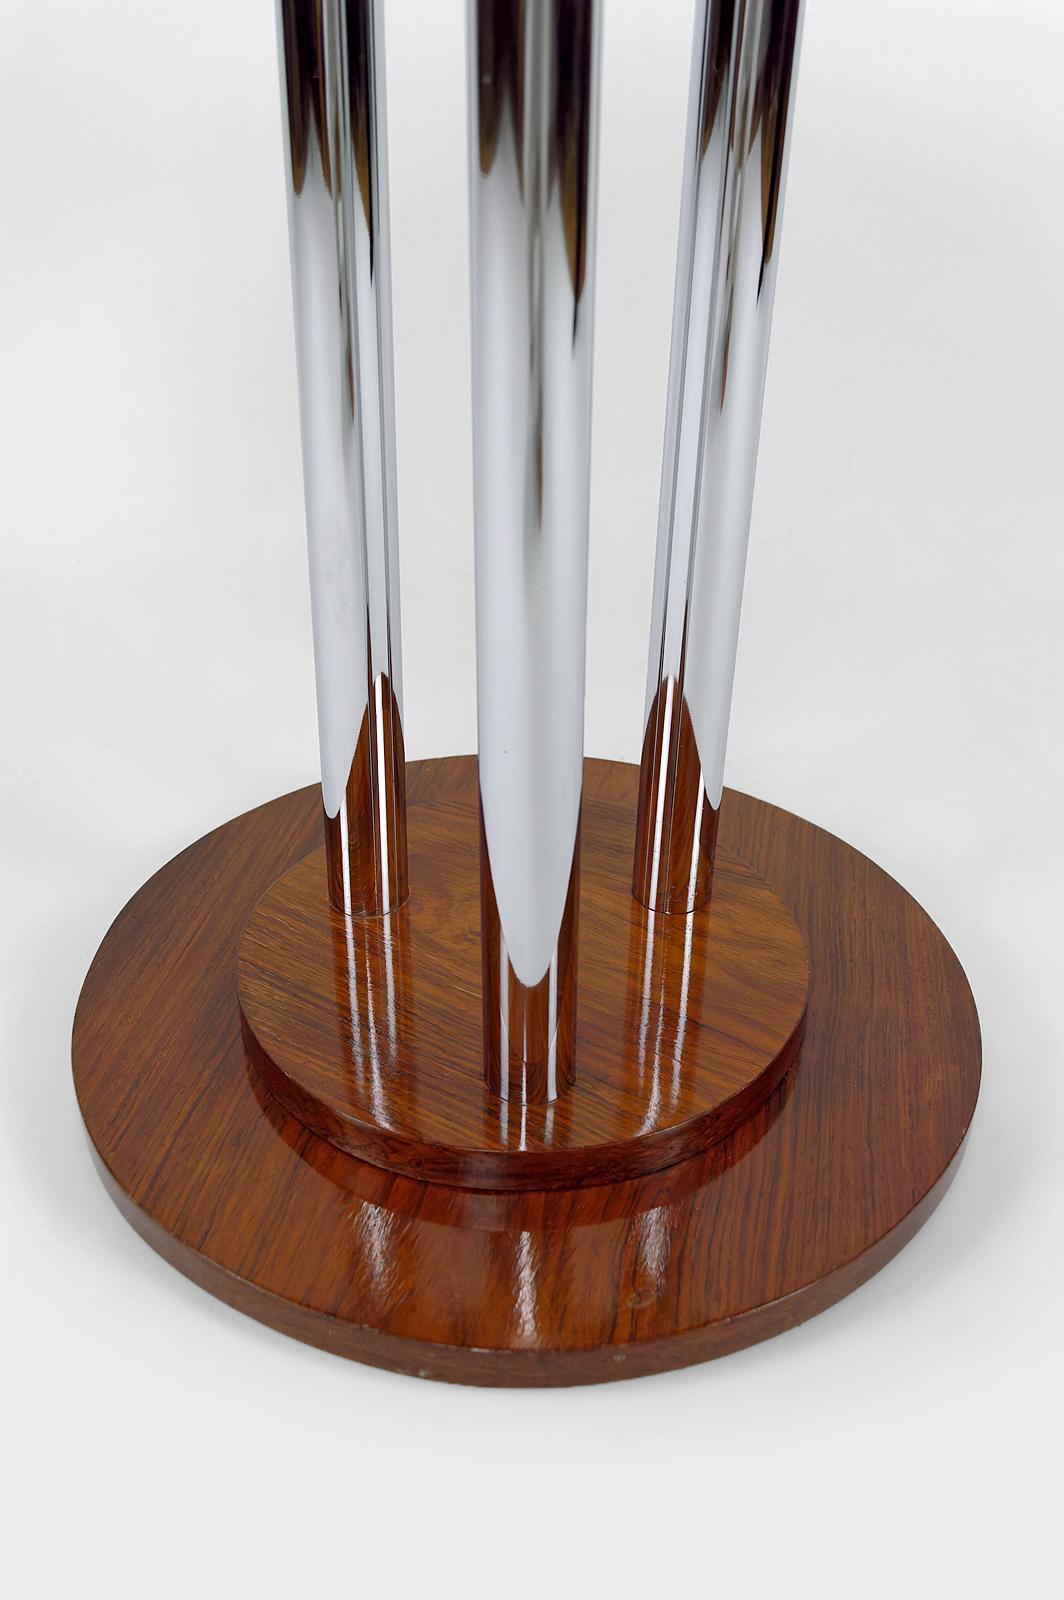 Modernist Art Deco pedestal table in walnut and chrome, France, Circa 1930 For Sale 4